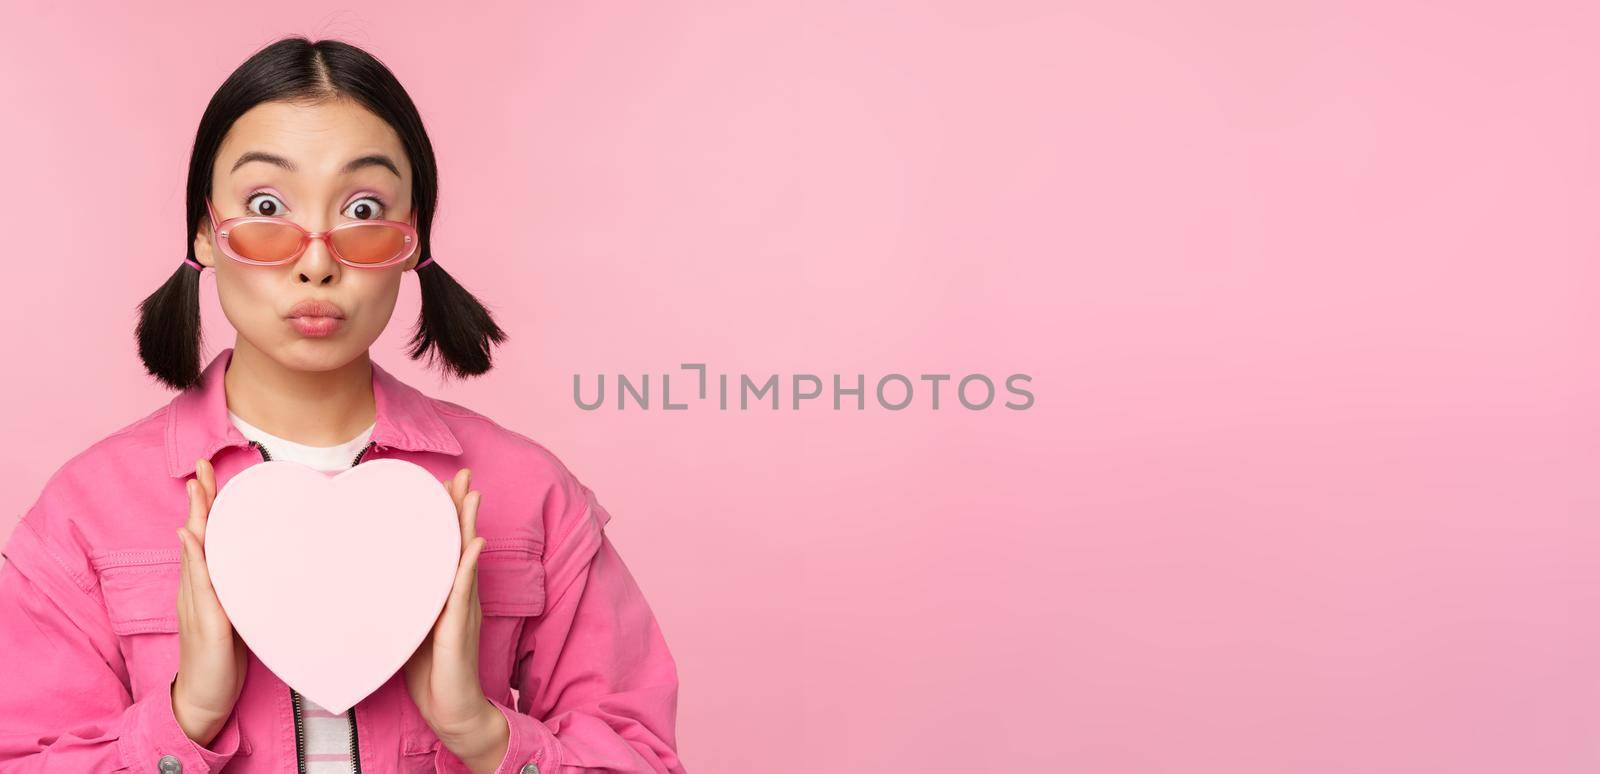 Cute asian girl showing heart shaped box with gift, looking surprised and excited, romantic present concept, wearing sunglasses, standing over pink background.